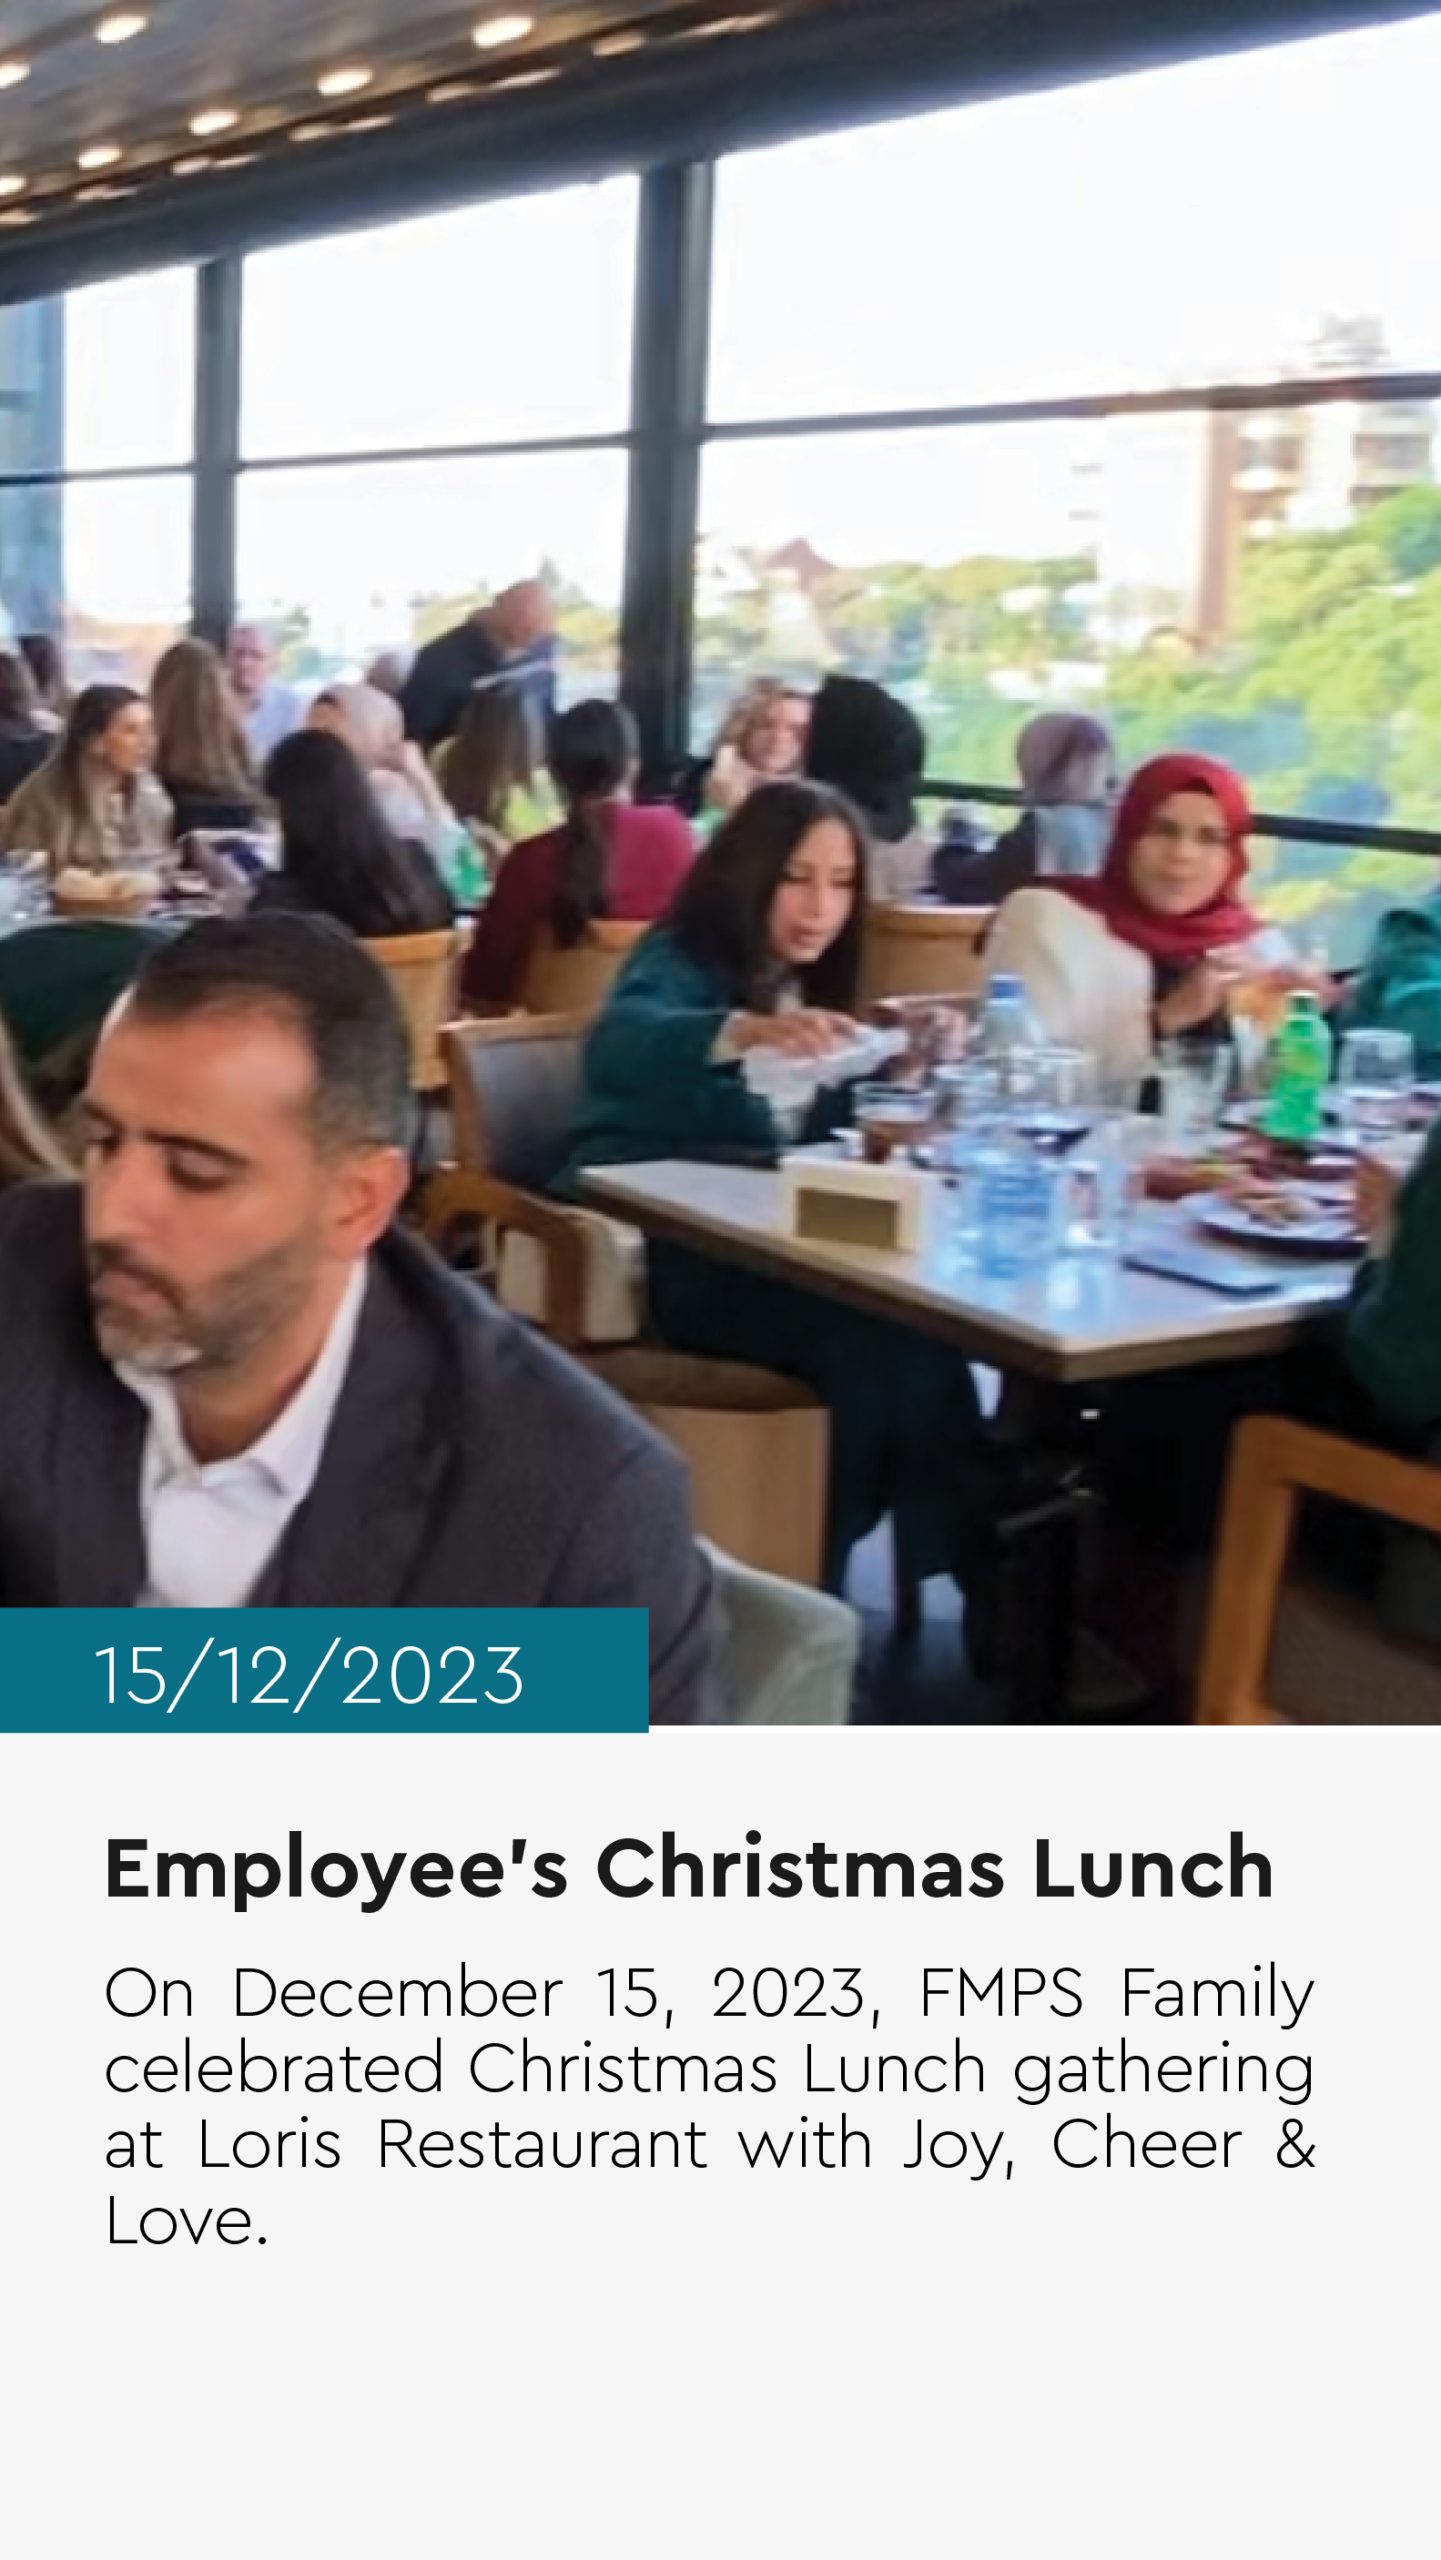 Tis the Season!
On December 15, 2023, FMPS Family celebrated Christmas Lunch gathering at Loris Restaurant with Joy, Cheer & Love.